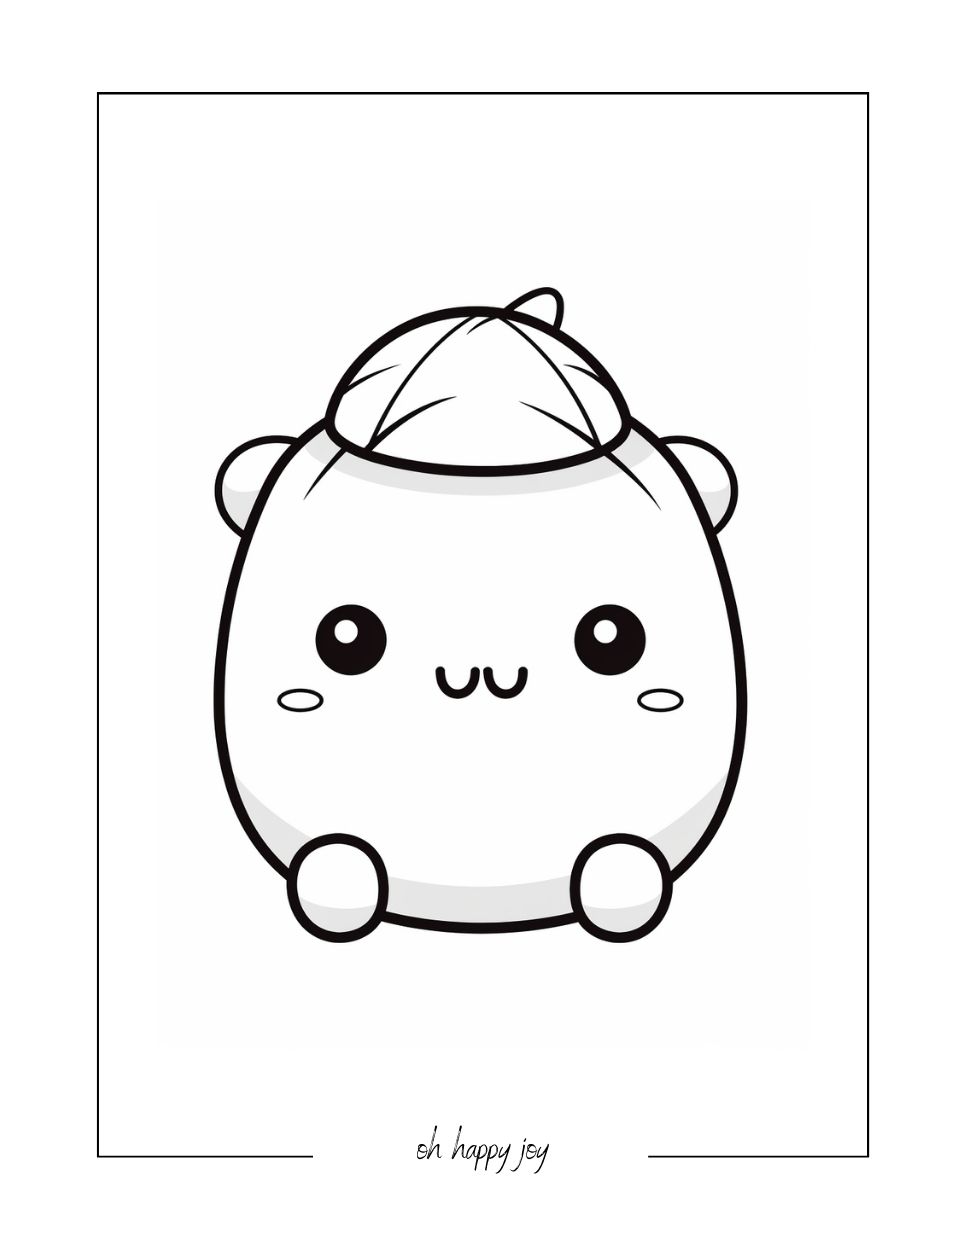 Squishmallow and hat coloring page